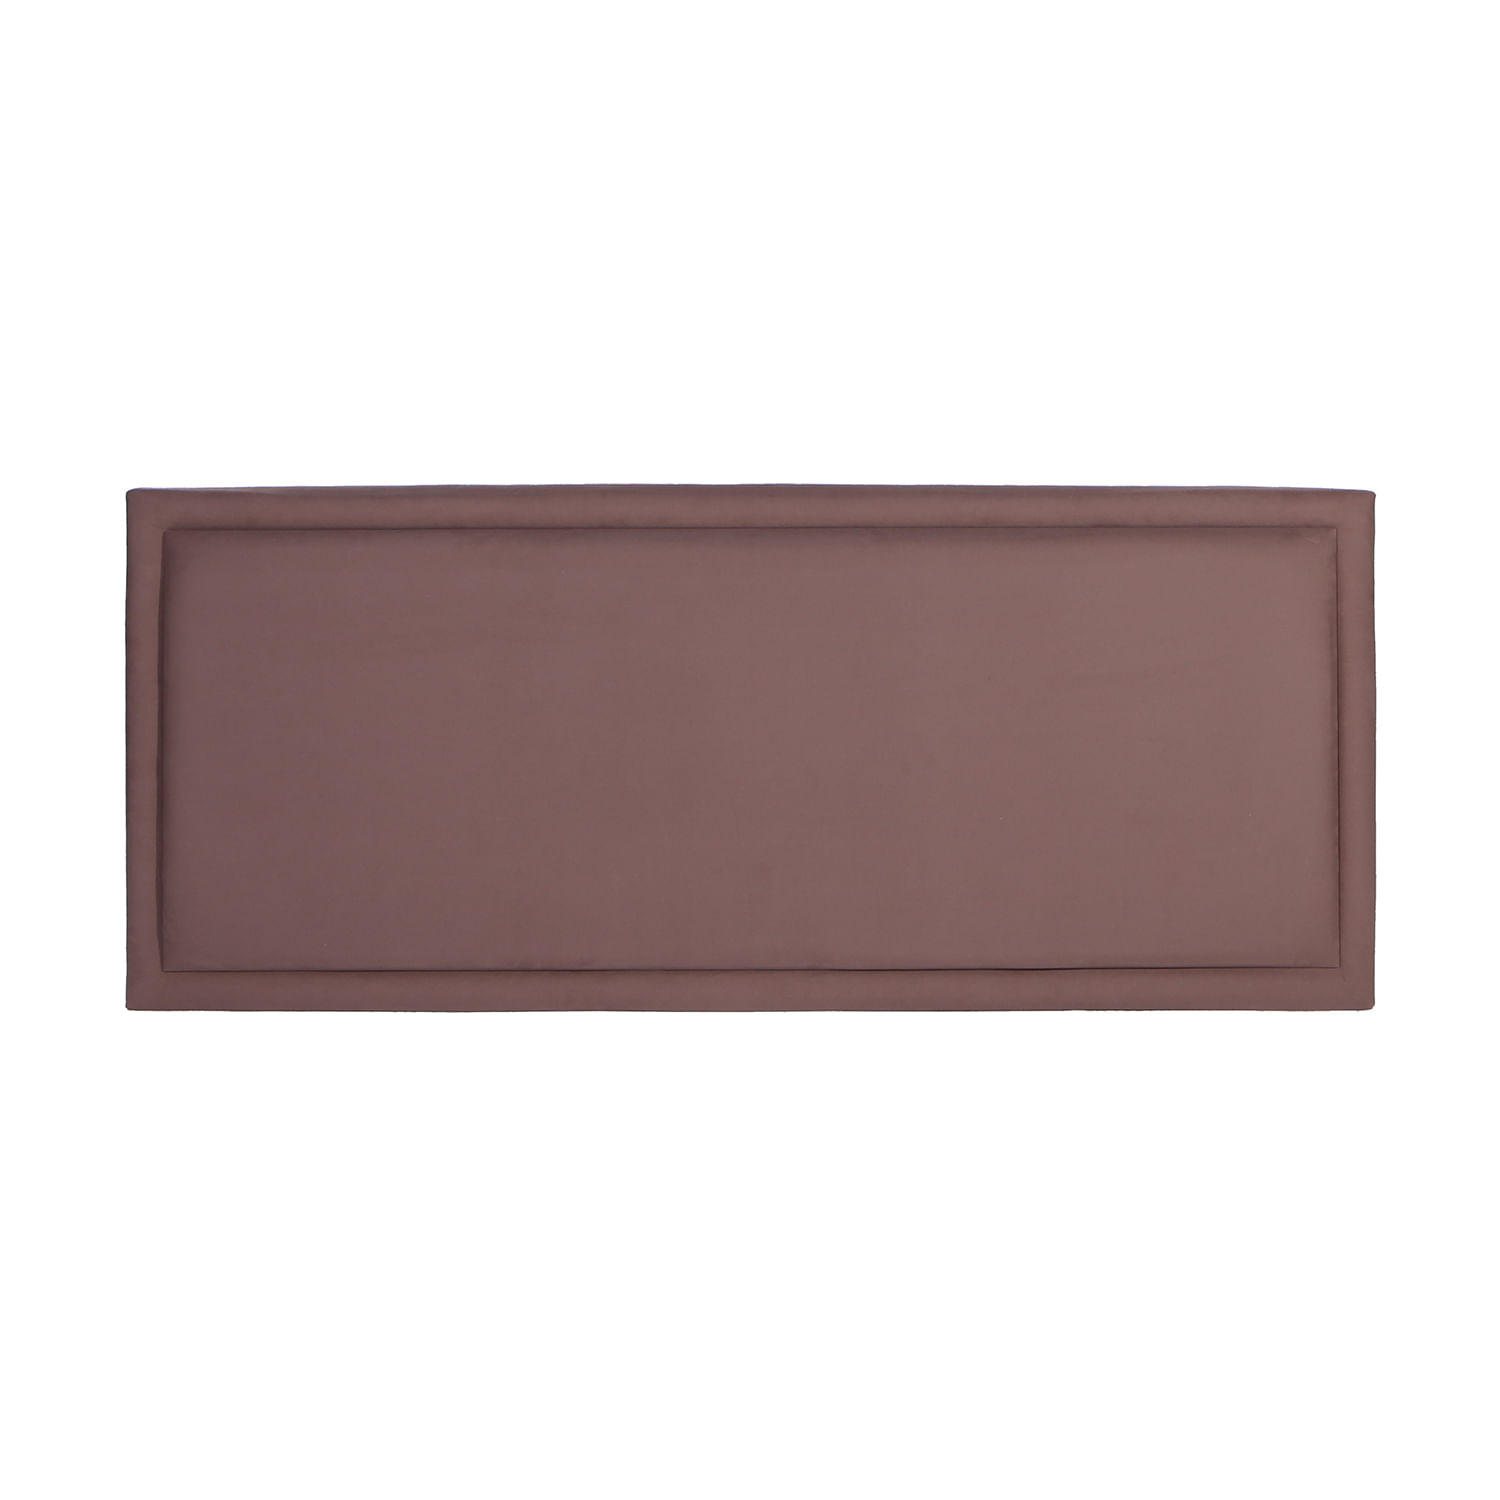 Painel-Joa-Suede-Chocolate-King